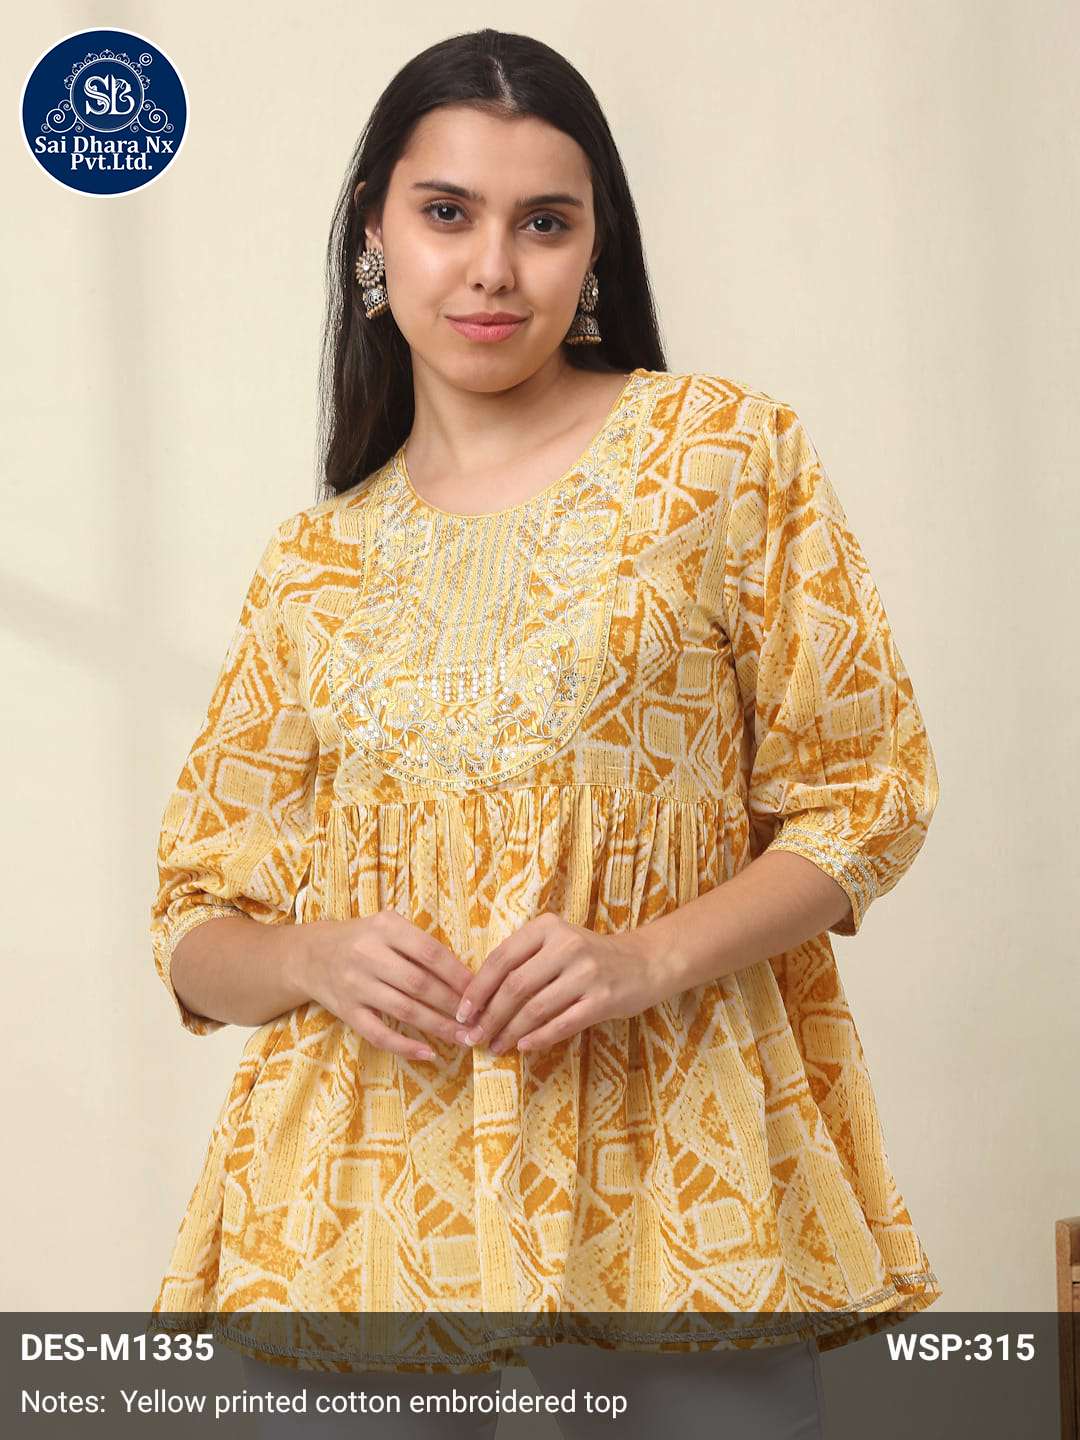 SAIDHARANX PRESENTS YELLOW PRINTED COTTON EMBROIDERED WORK TOP COLLECTION WHOLESALE SHOP IN SURAT - SaiDharaNx